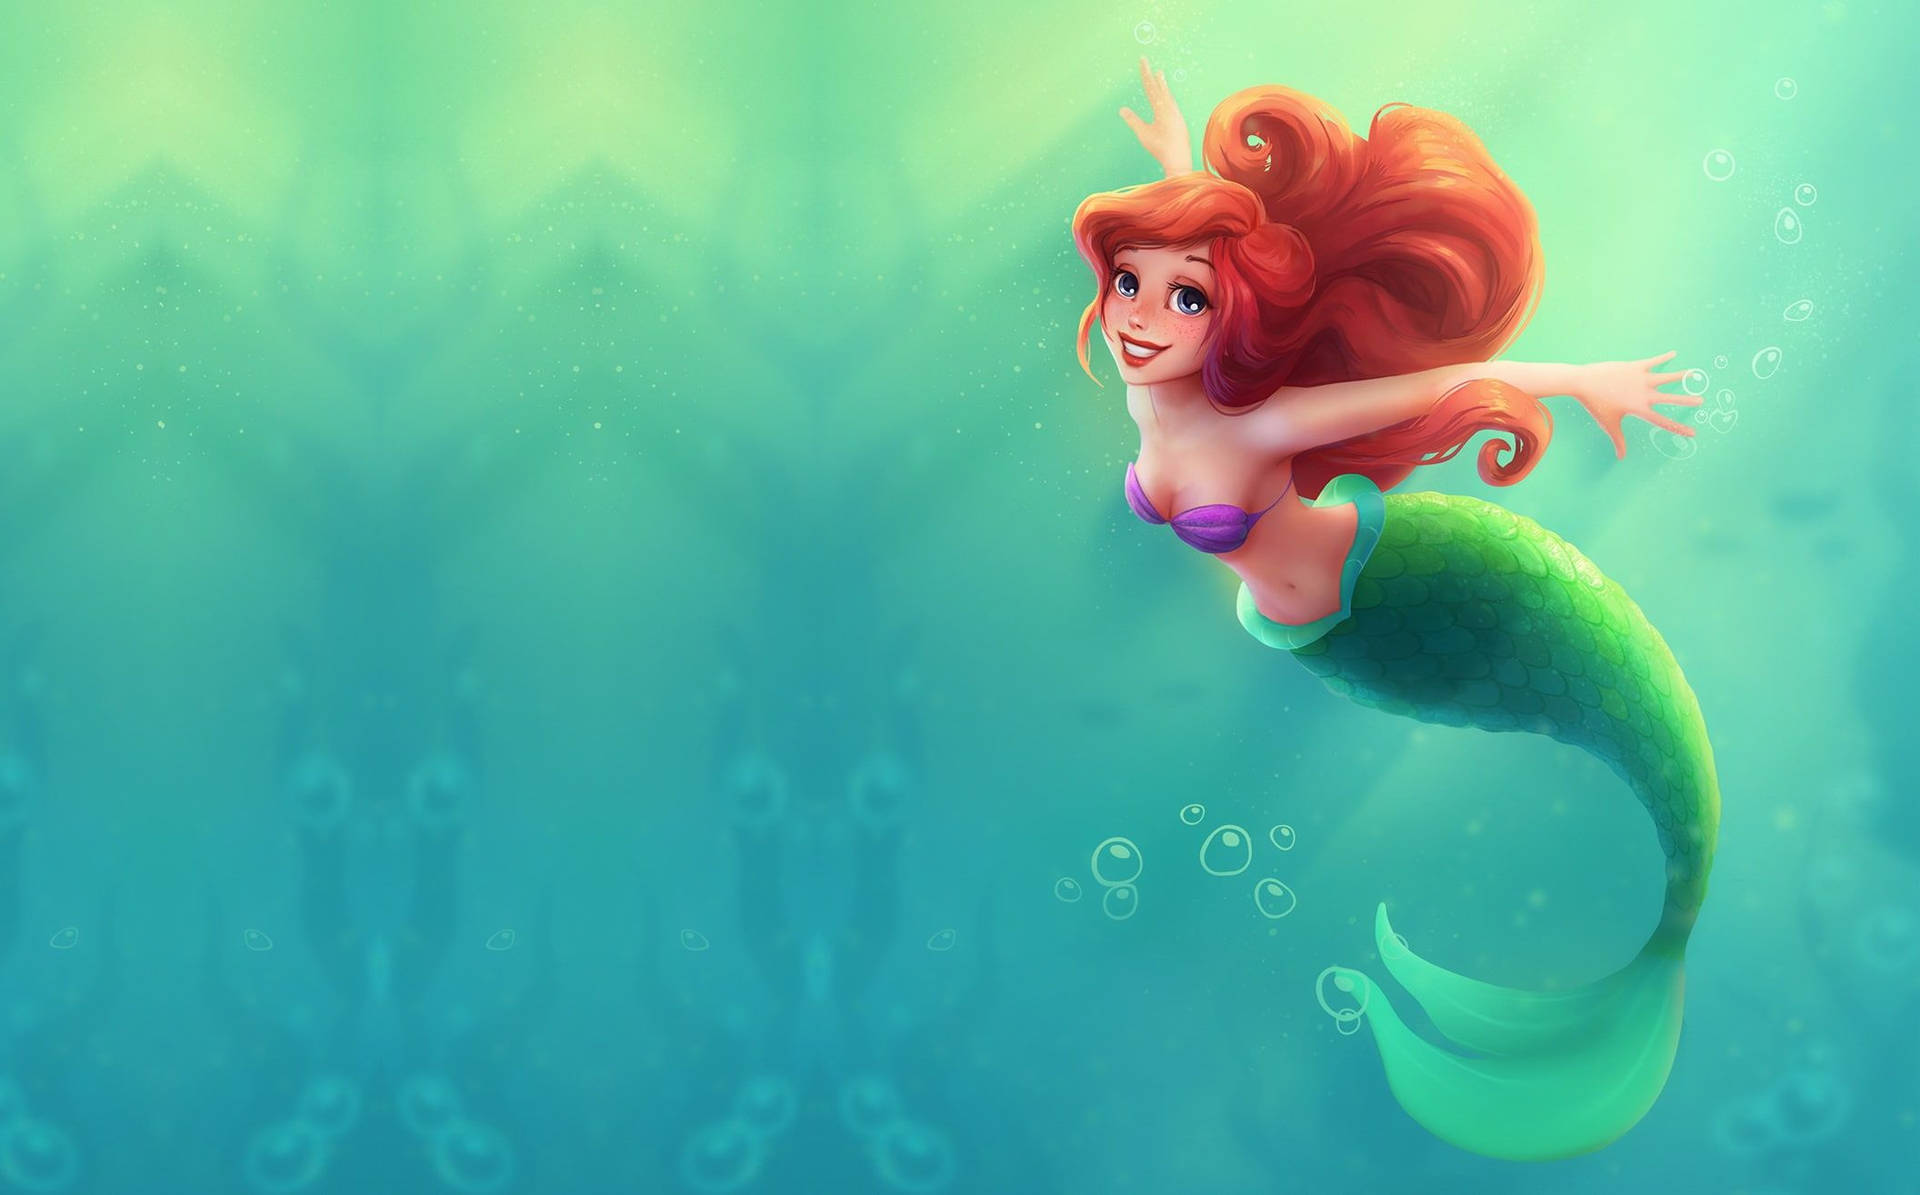 The Little Mermaid In Green Tail